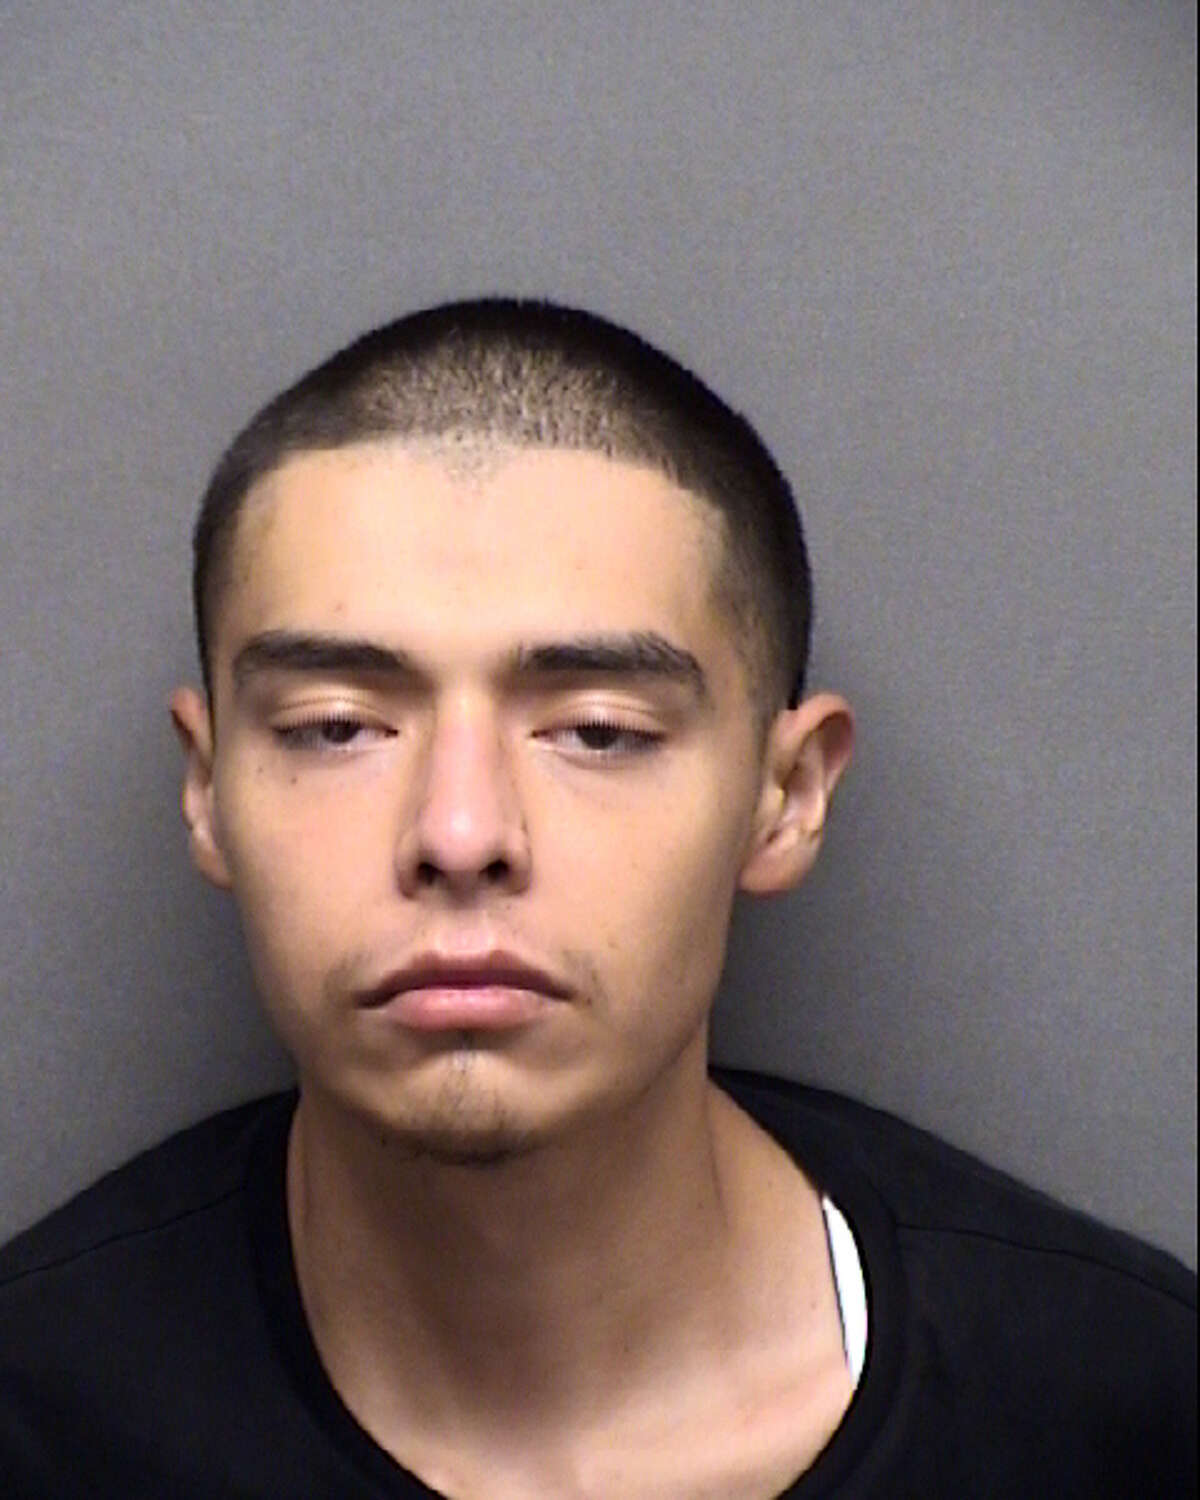 Robert Camacho Rodriguez III was charged with murder in connection with the death of Frederick Lopez.